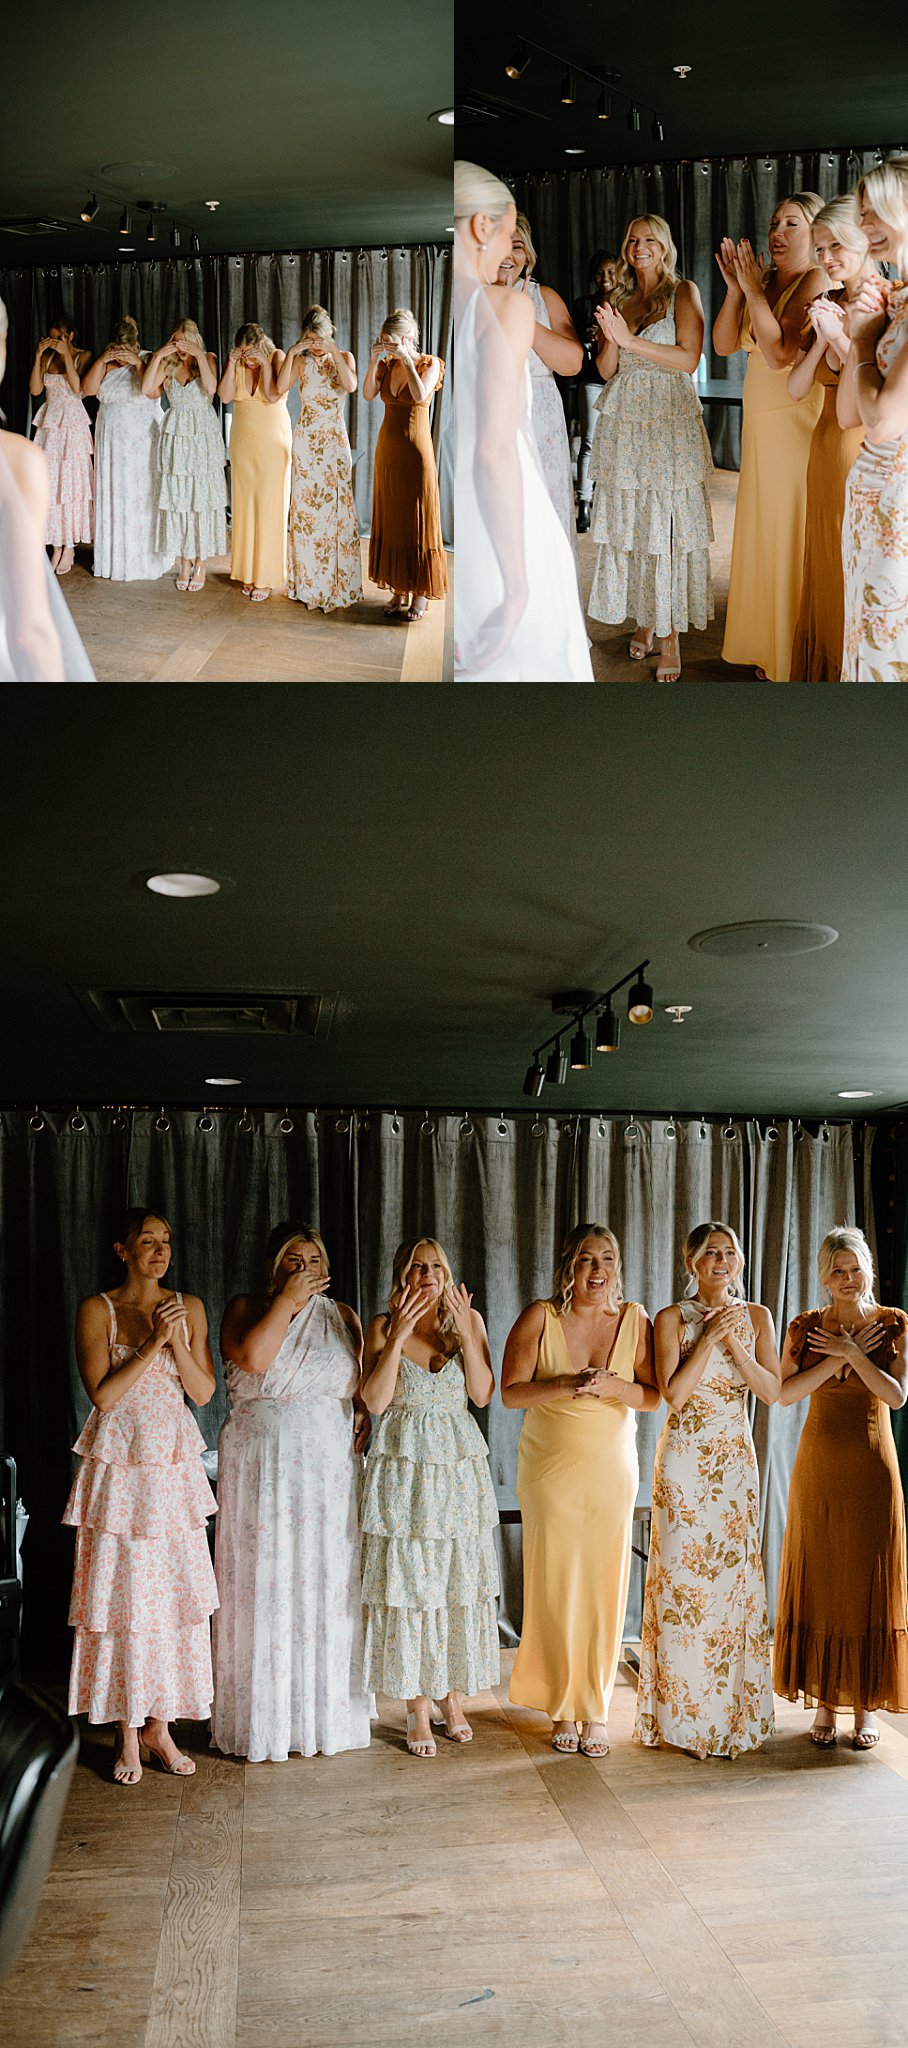 bridesmaids see the bride for the first time by Indigo Lace Collective